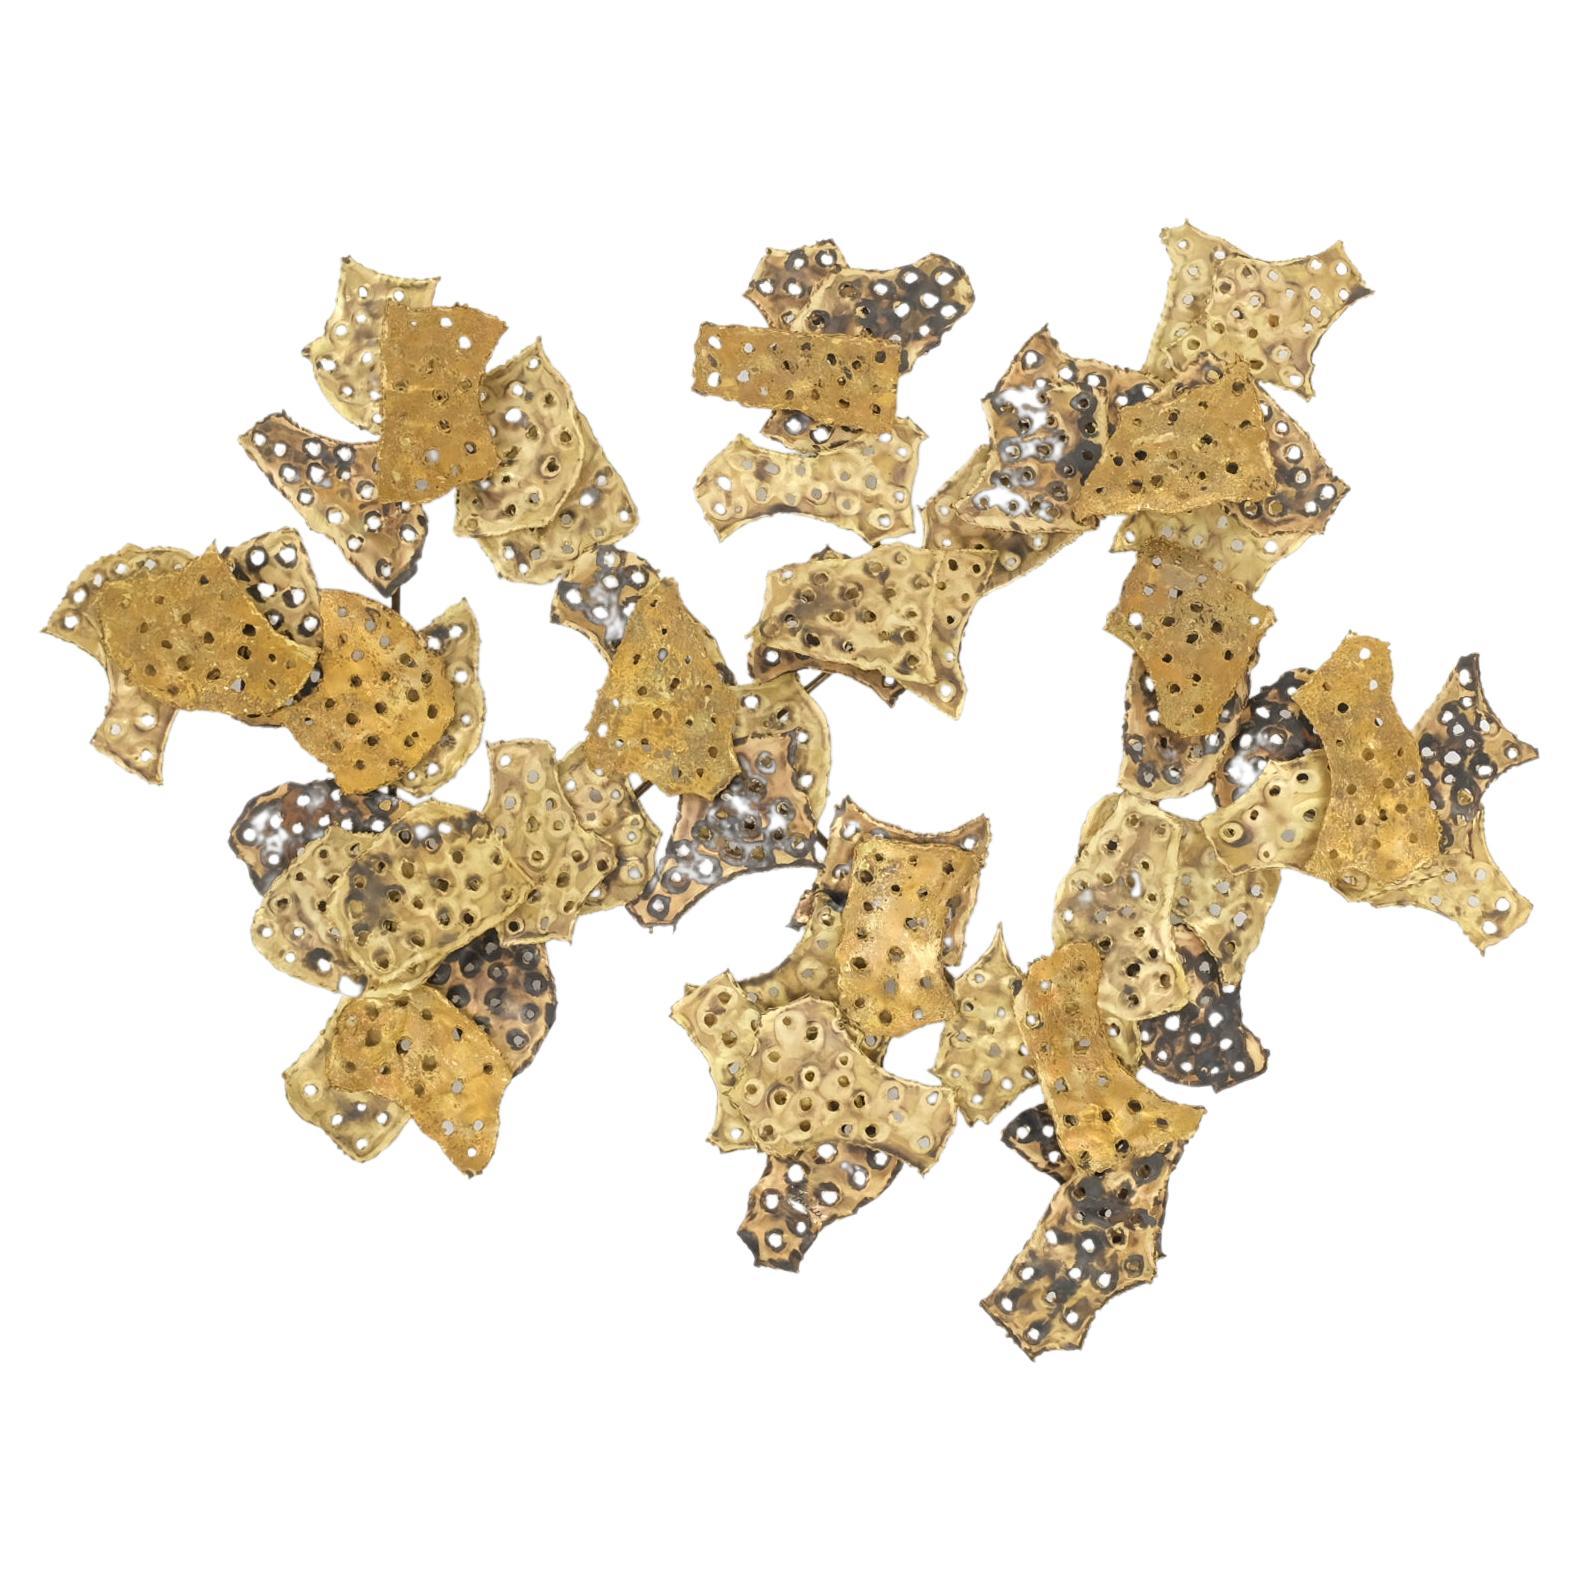 Curtis Jere Molten Brass Flakes Wall Sculpture For Sale